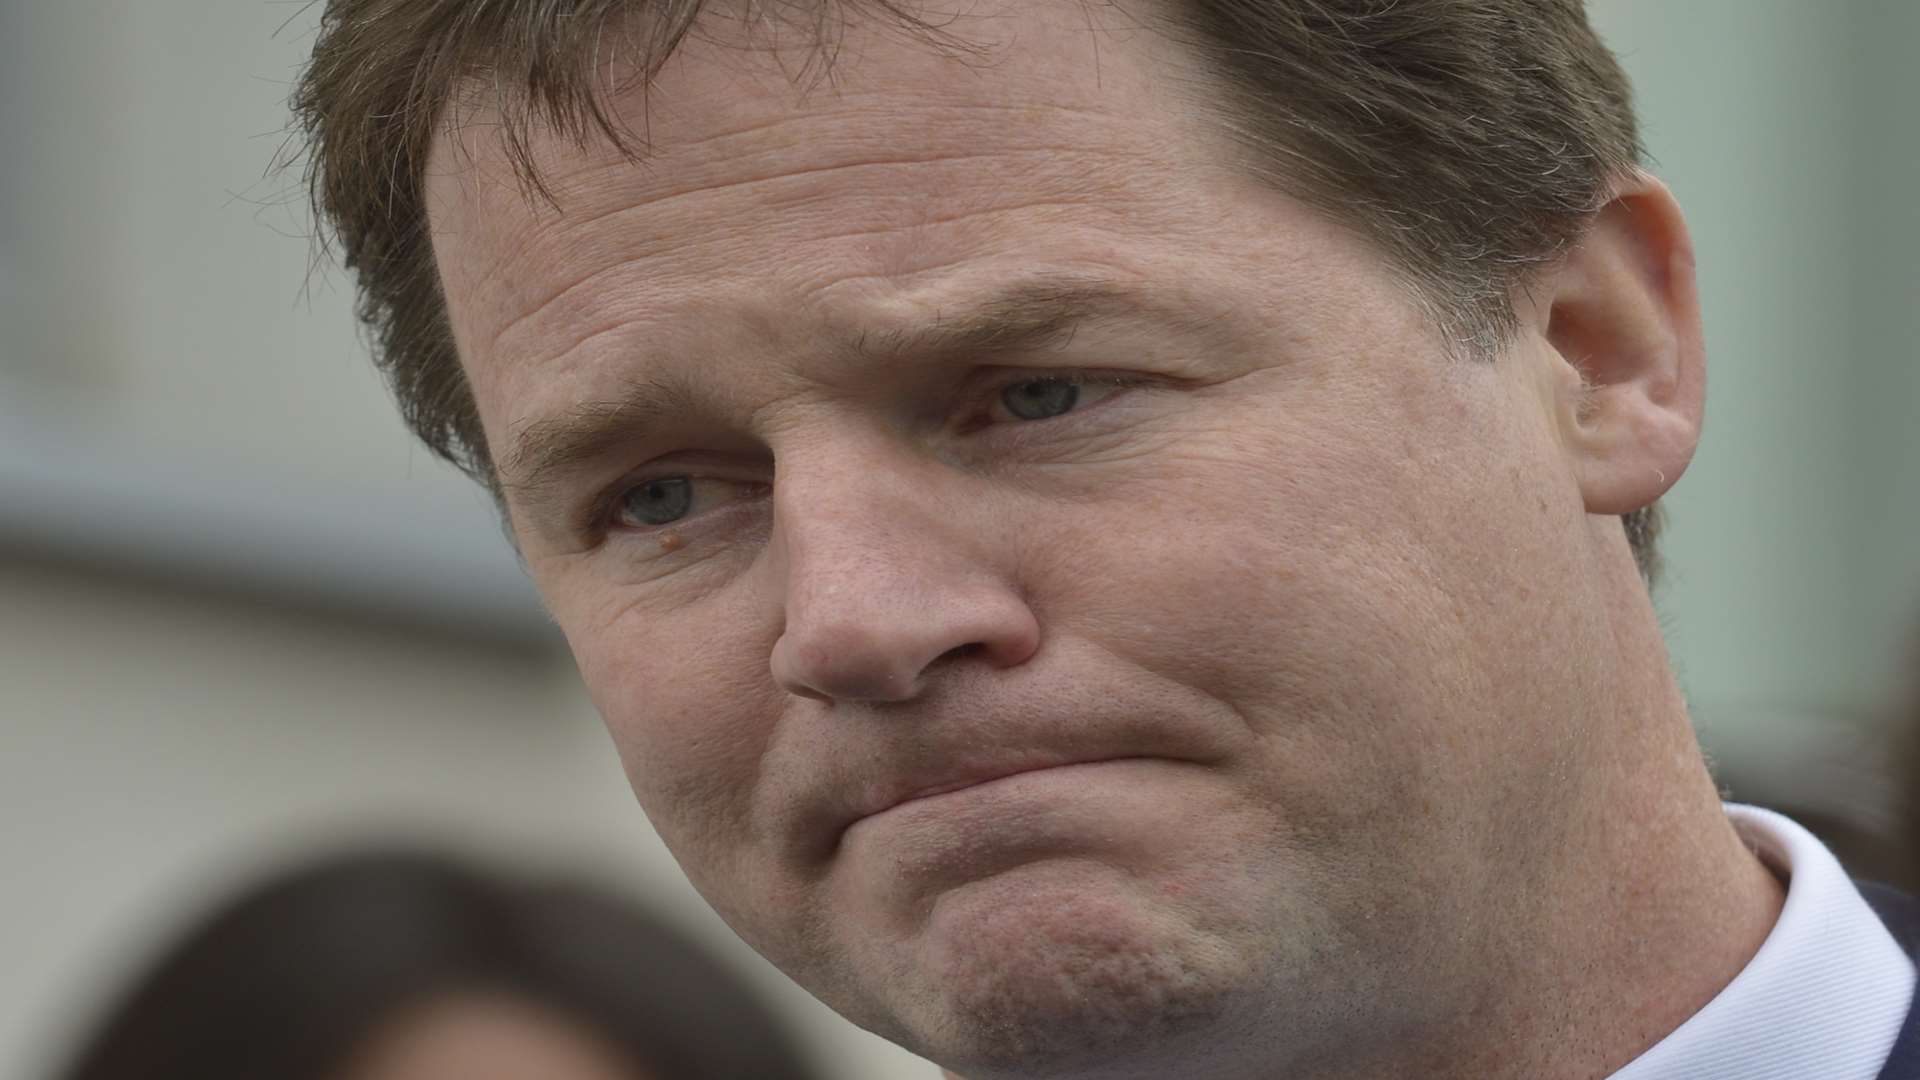 Clegg was forced to resign following the May 2015 General Election.